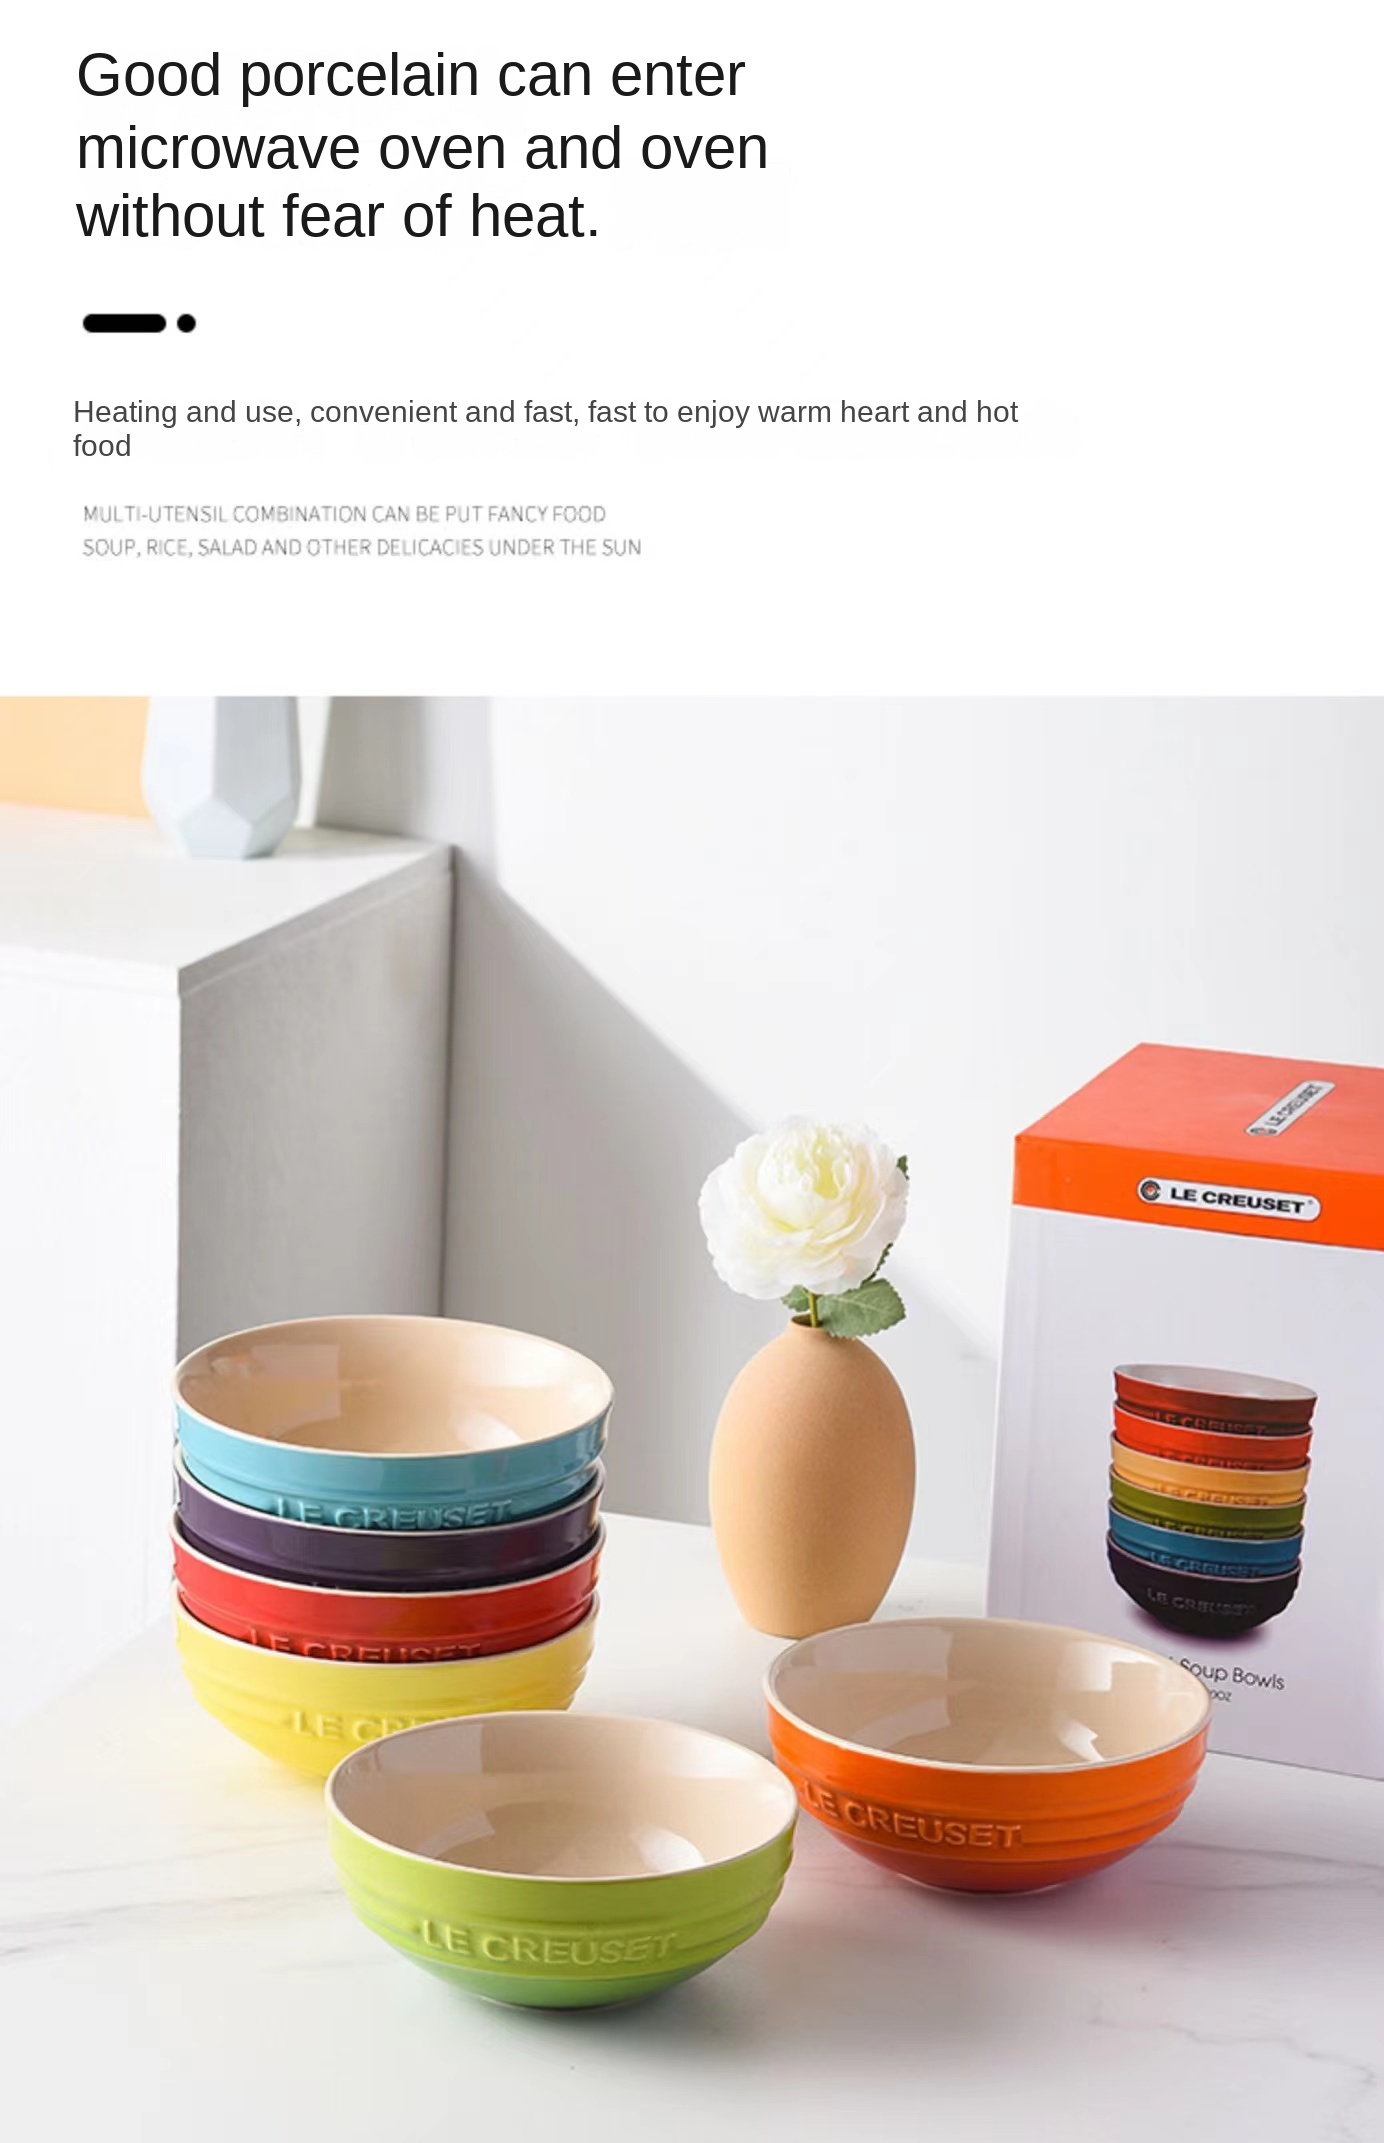 Le Creuset Stoneware rainbow set of 6 cereal bowls